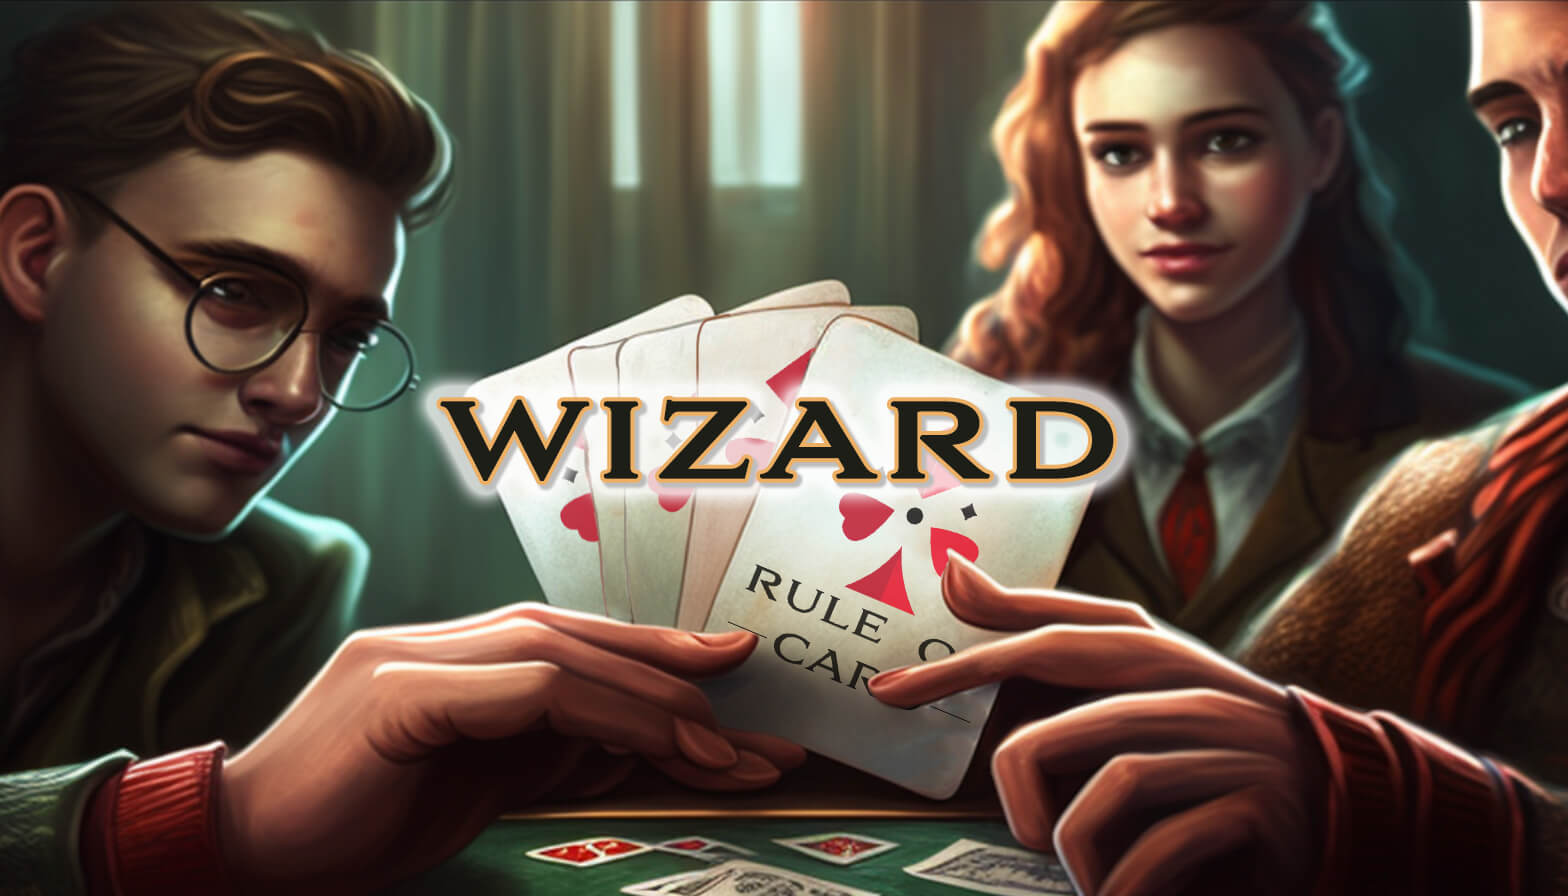 Playing the card game Wizard